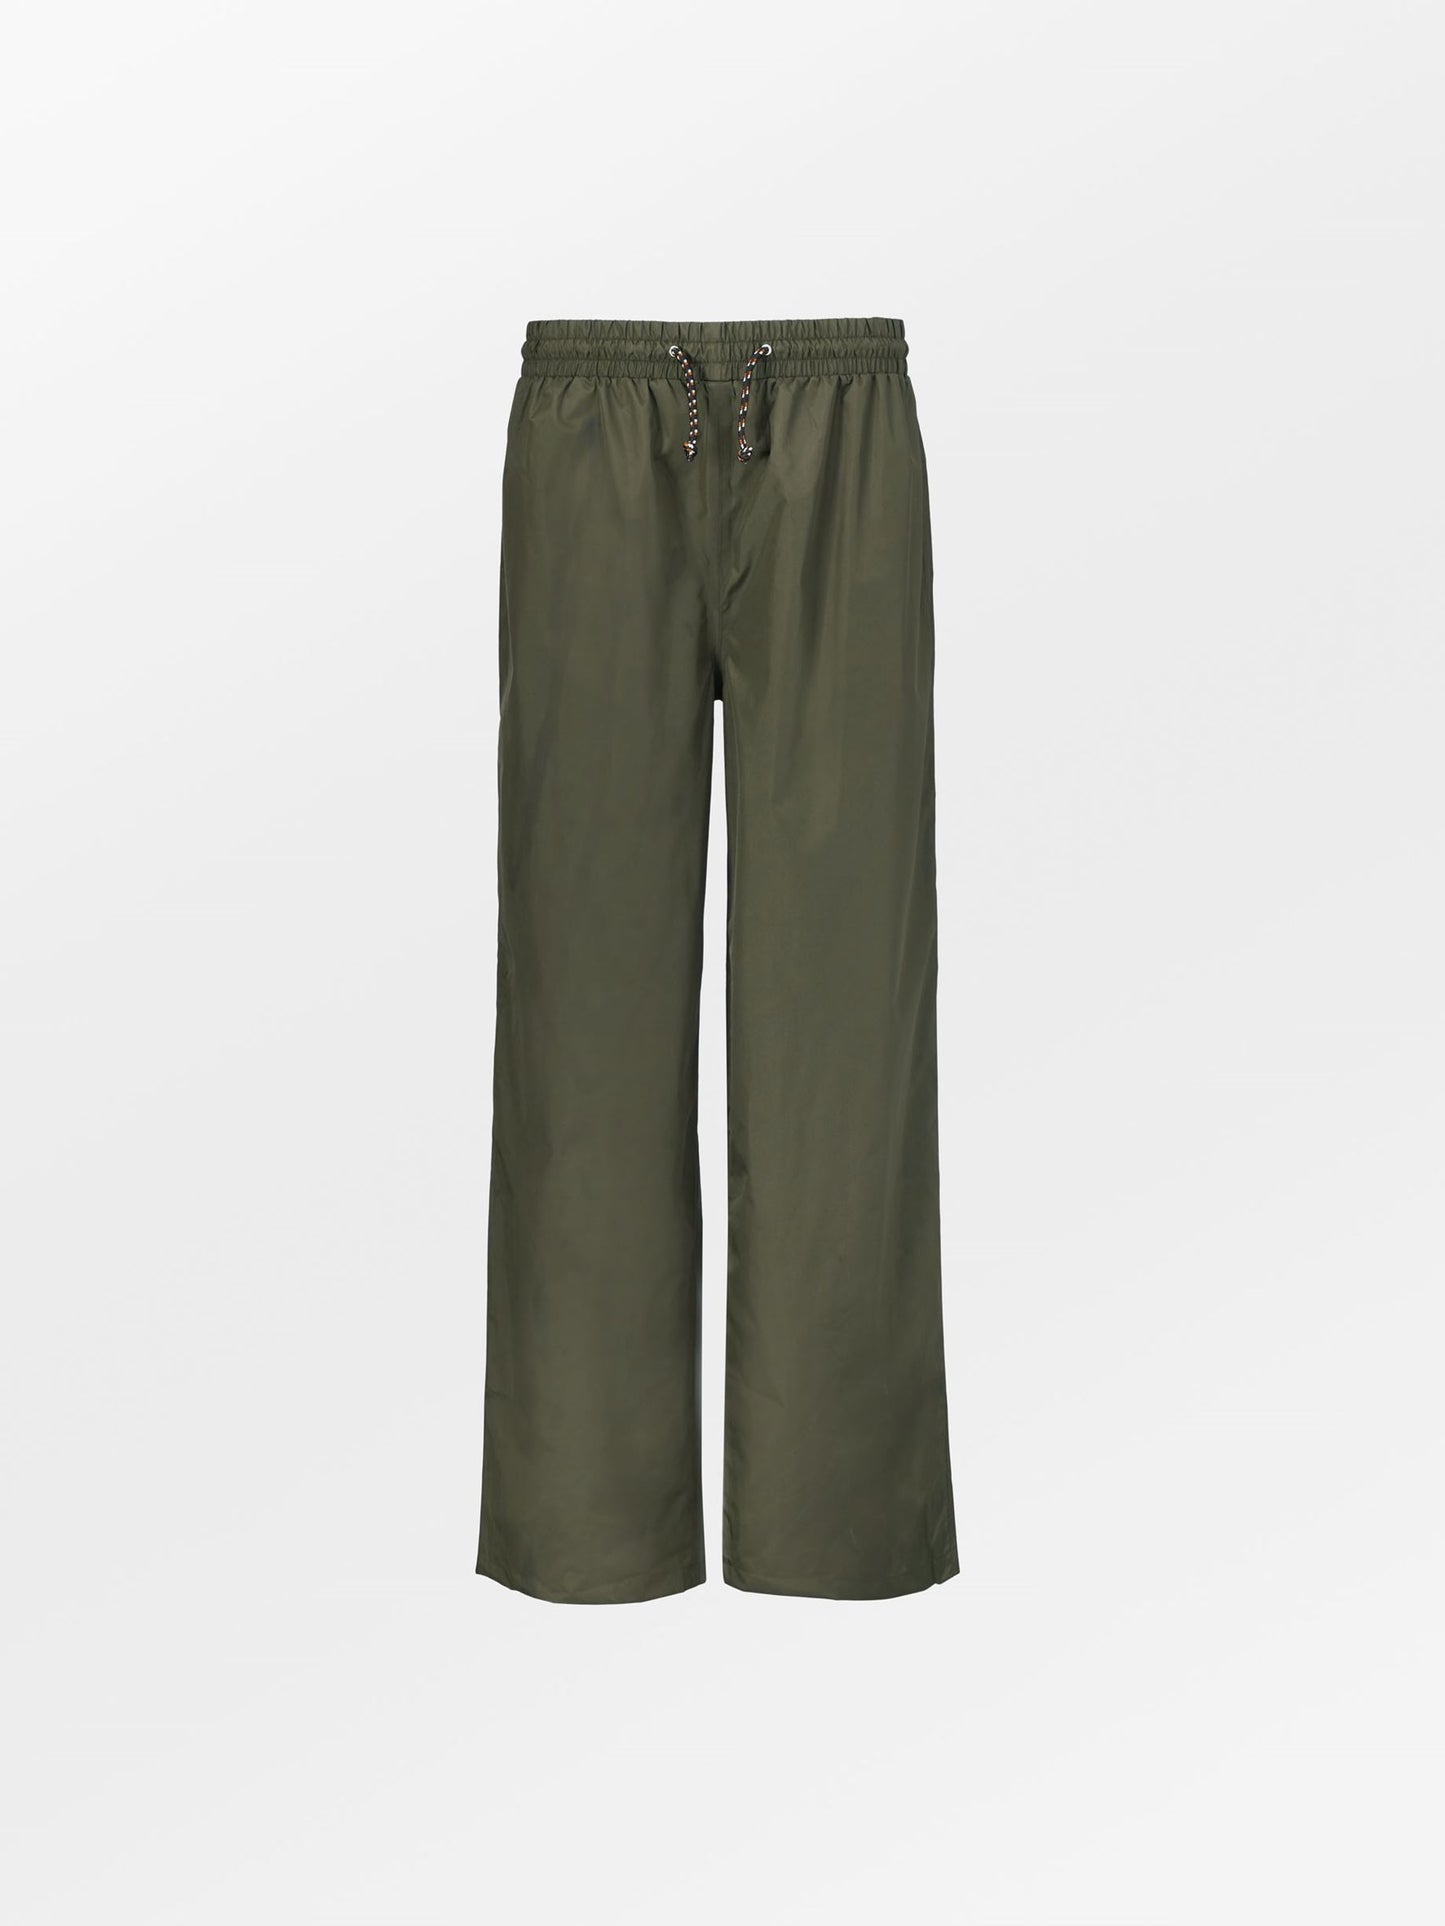 Becksöndergaard, Solid Maggie Rain Pants - Army Green, archive, sale, accessories, sale, archive